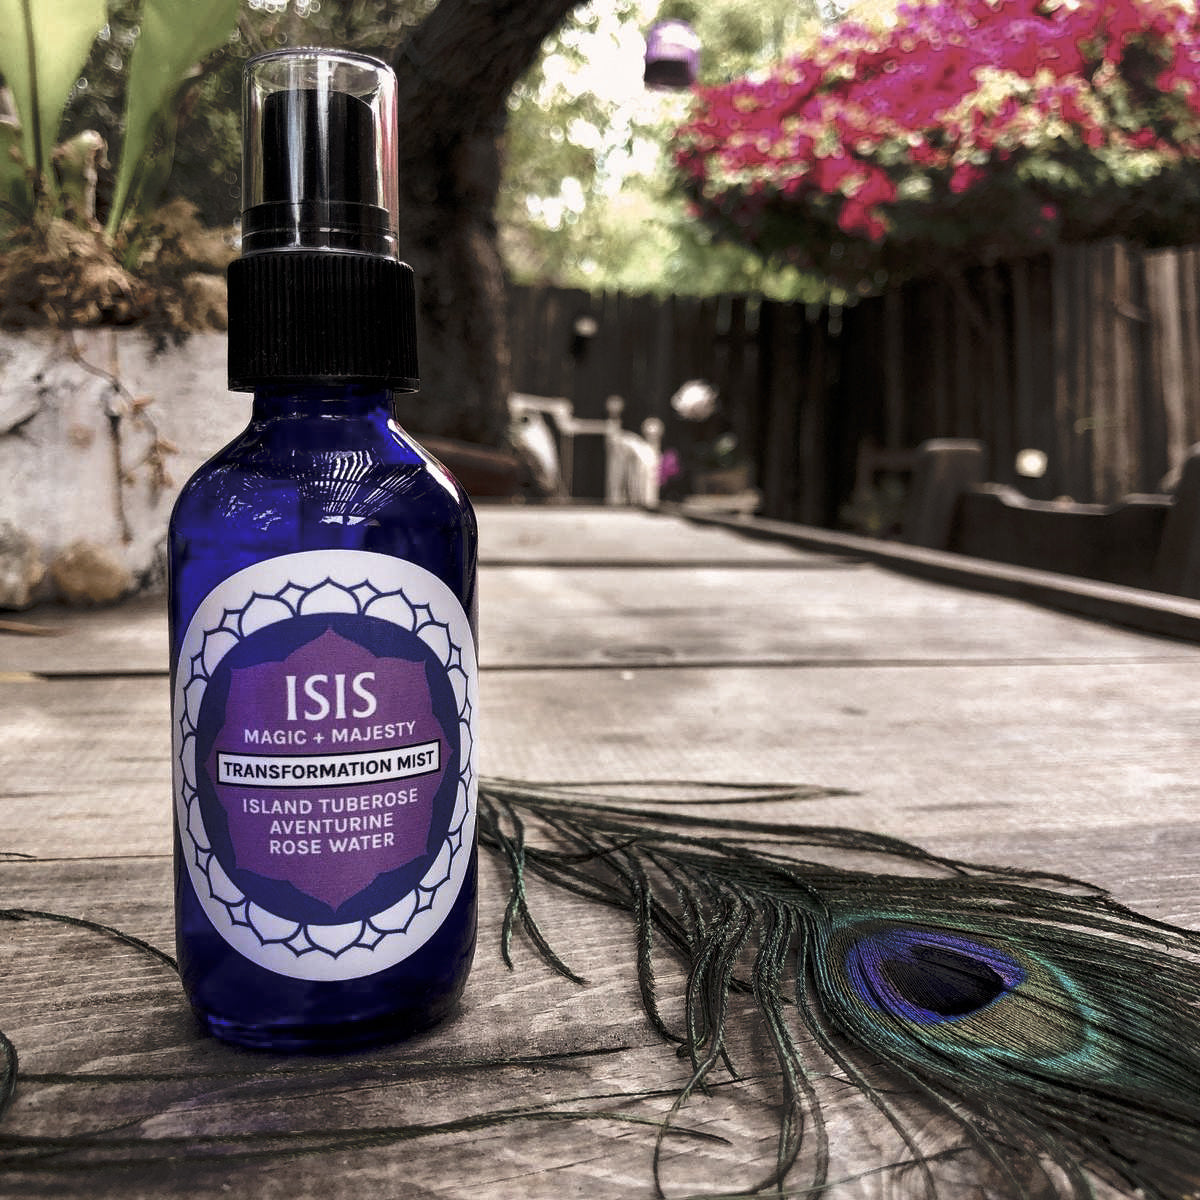 ISIS Transformation Mist for Magic + Majesty